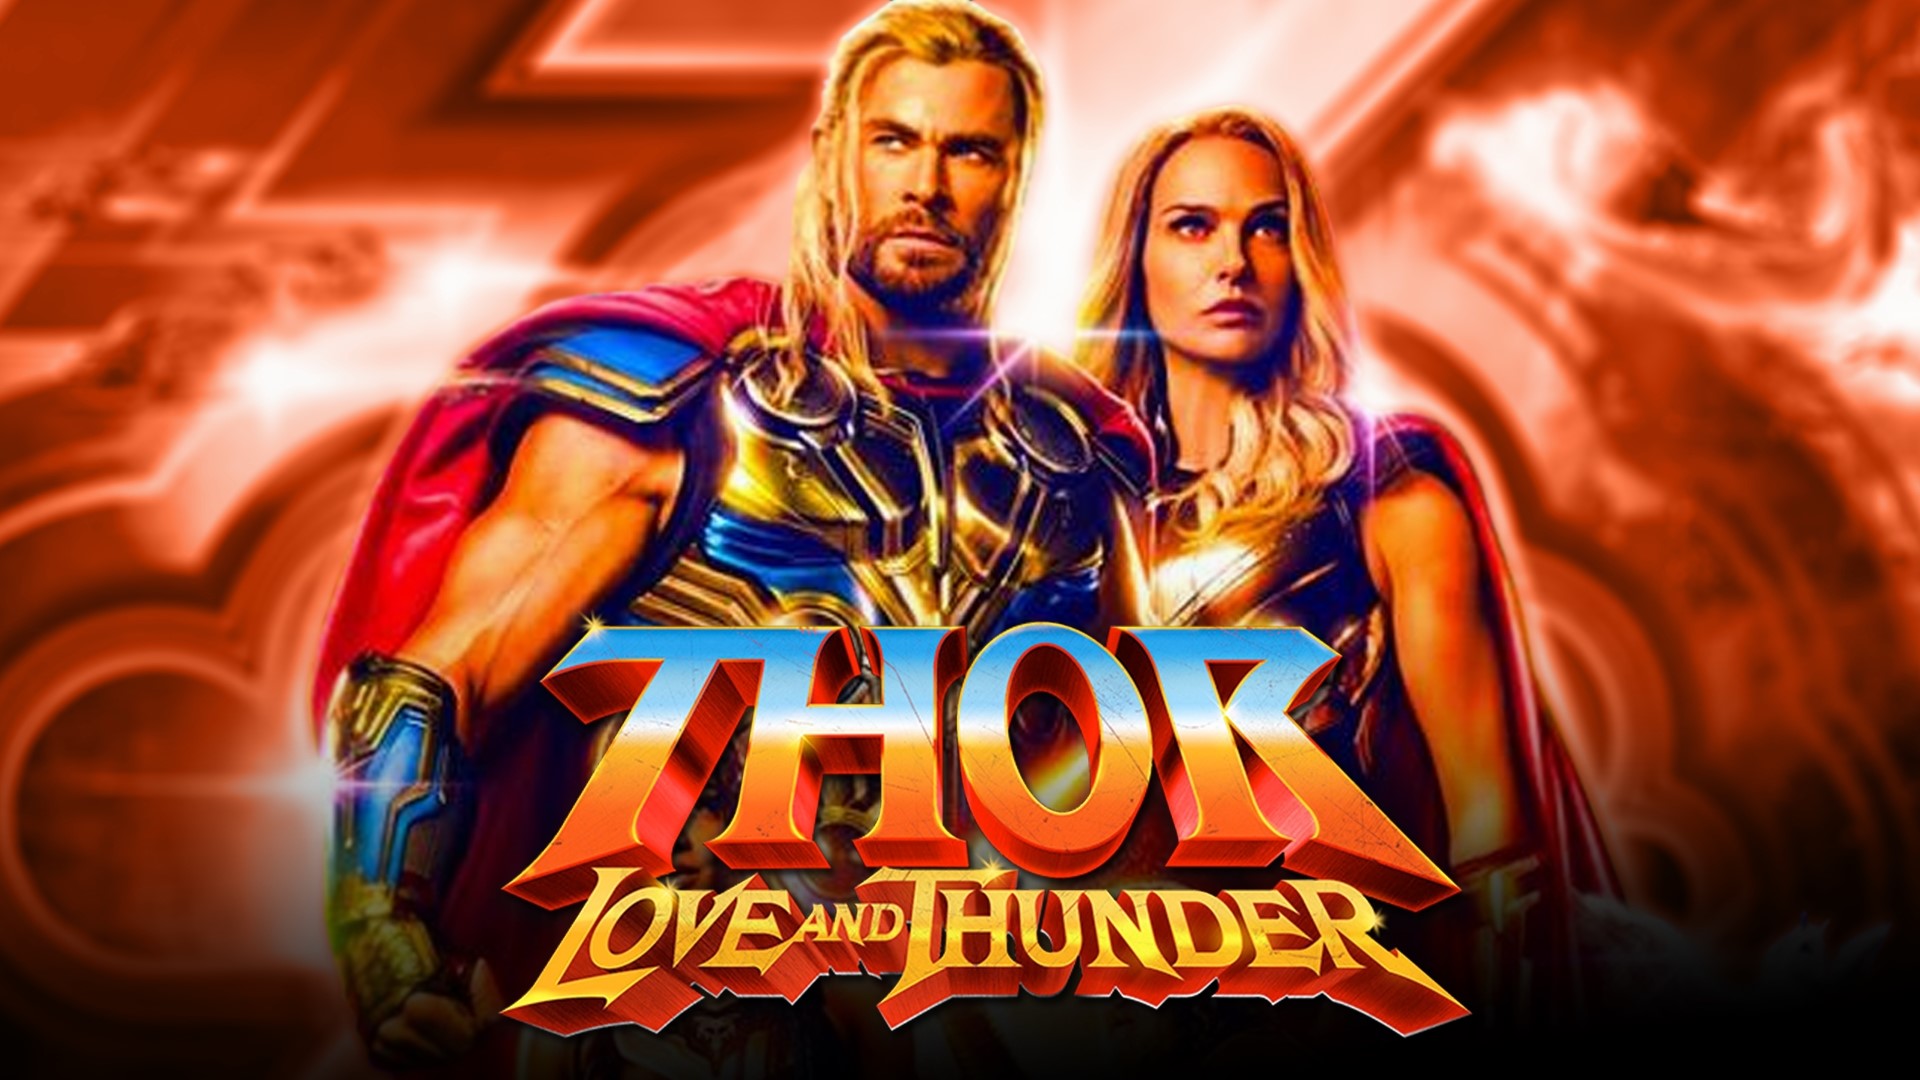 Thor goes on a road trip with his ex-girlfriend, screaming goats, and a bunch of emotional baggage.